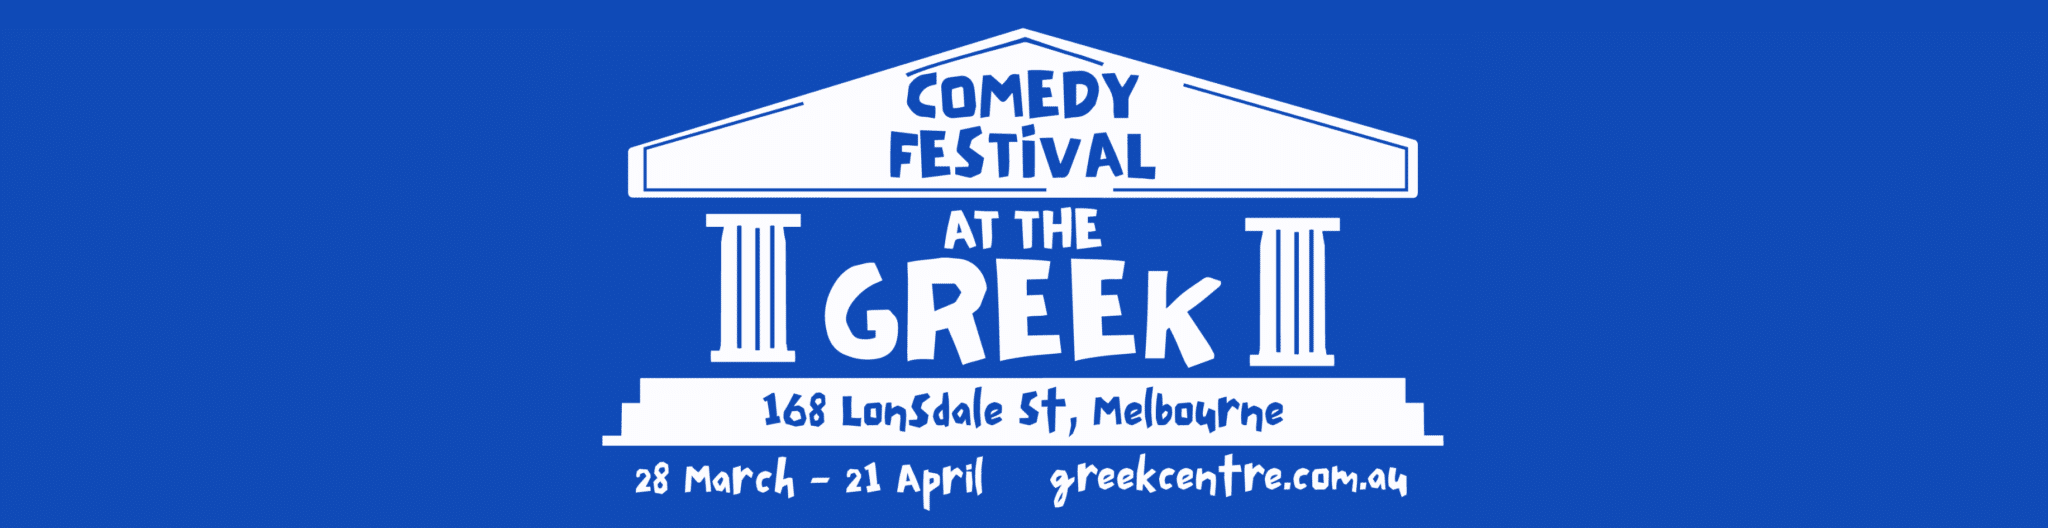 Comedy Festival At The Greek